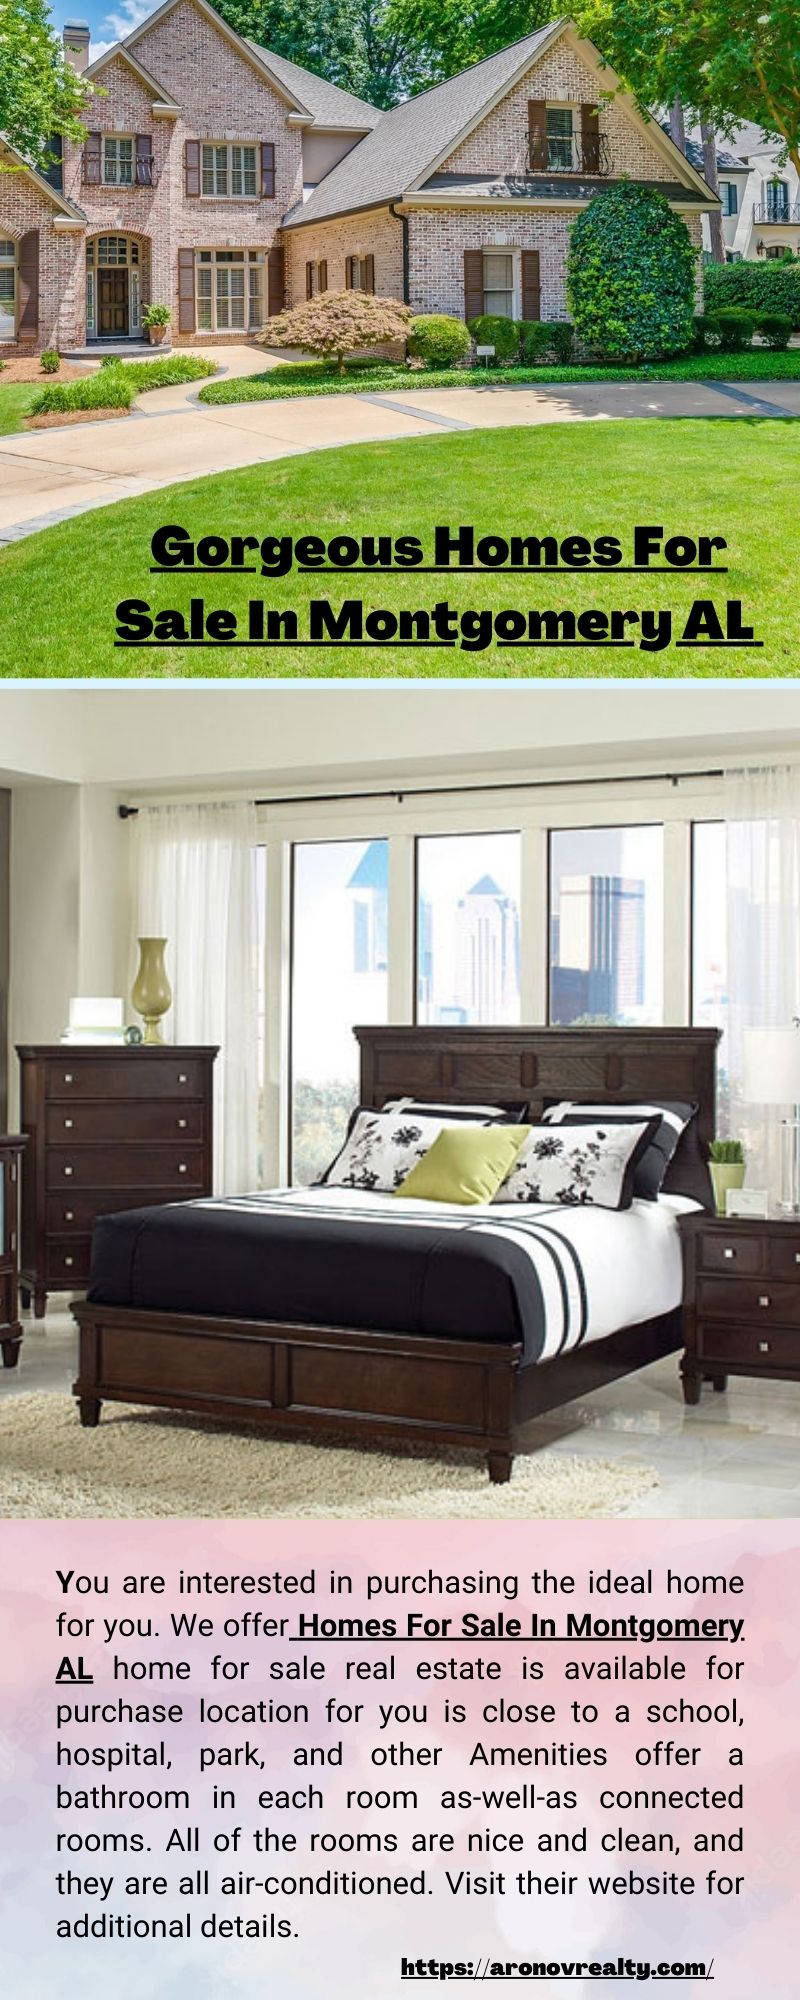 Gorgeous Homes For Sale In Montgomery AL